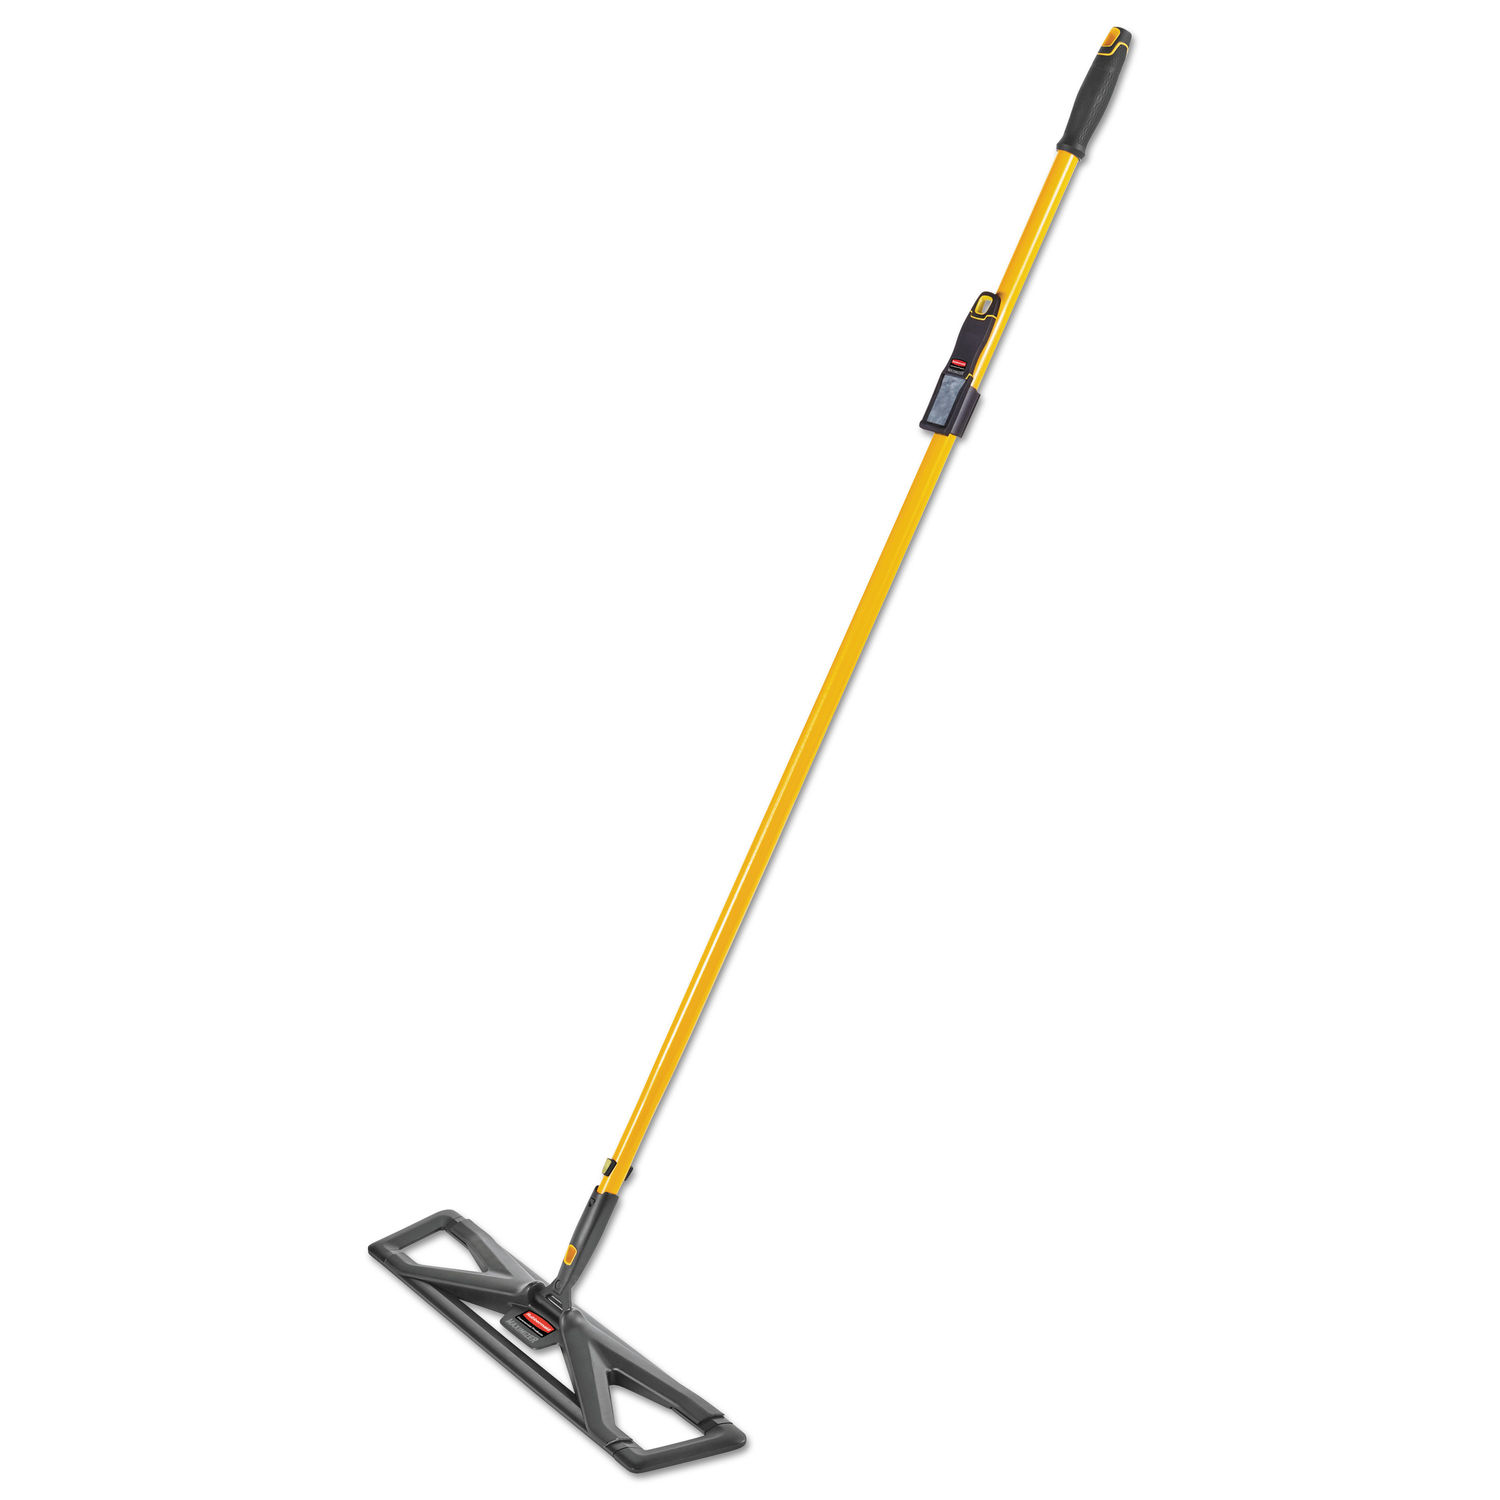 Maximizer Dust Mop Frame with Handle and Scraper 24" x 5.5", Yellow/Black